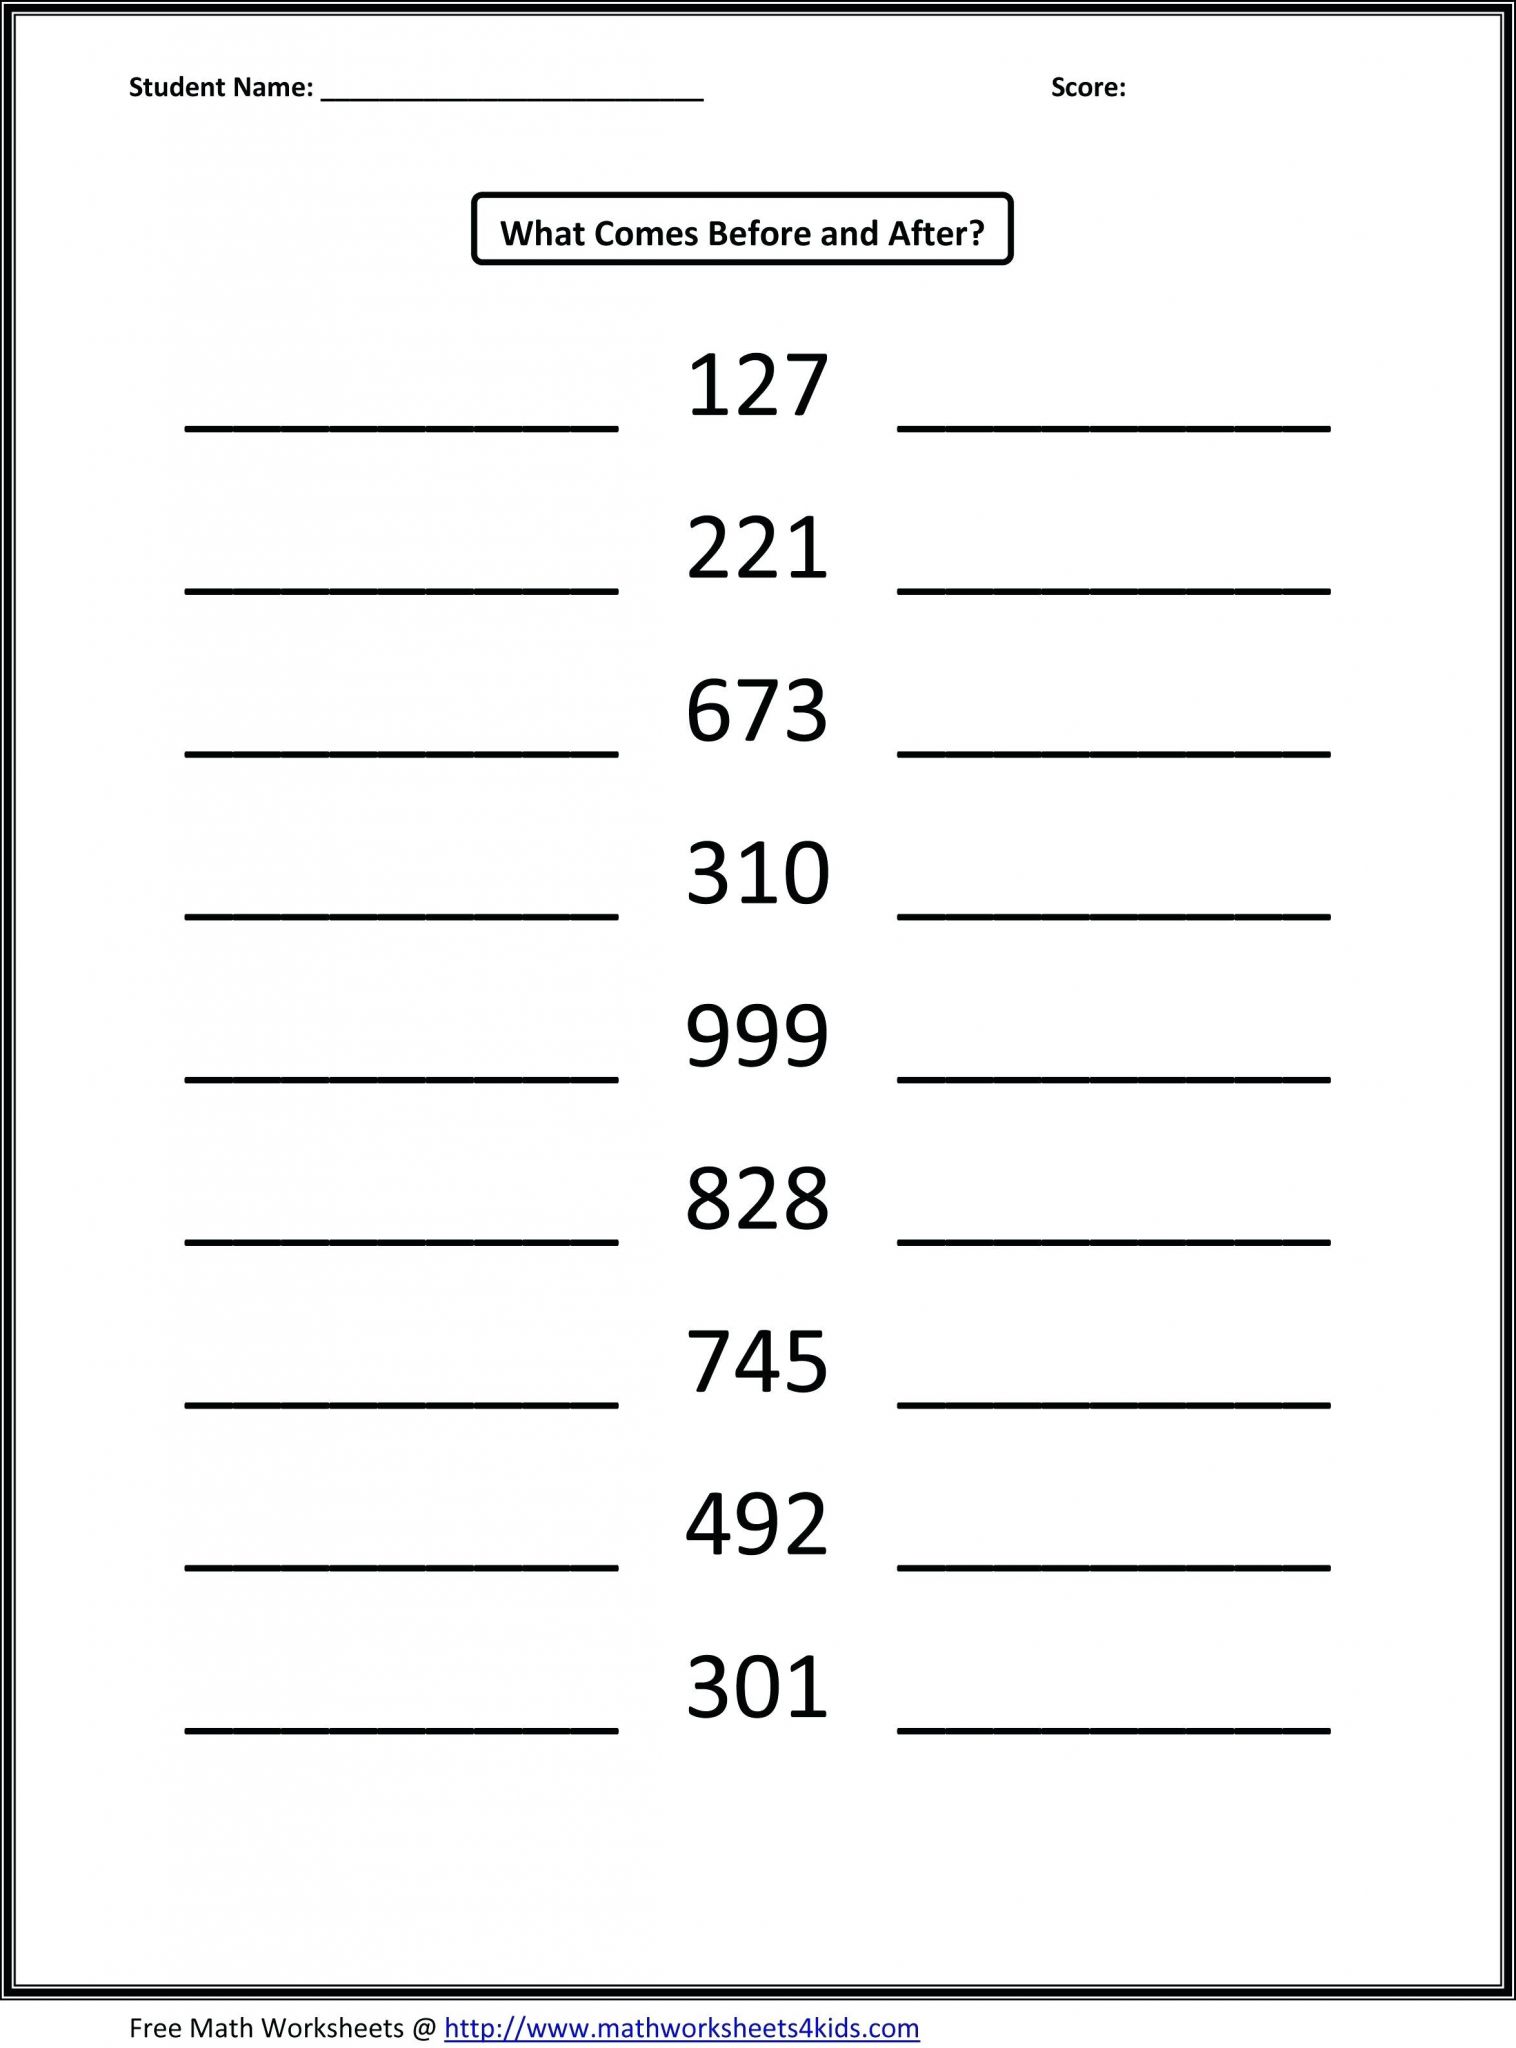 3-free-math-worksheets-second-grade-2-addition-add-4-single-digit-numbers-amp